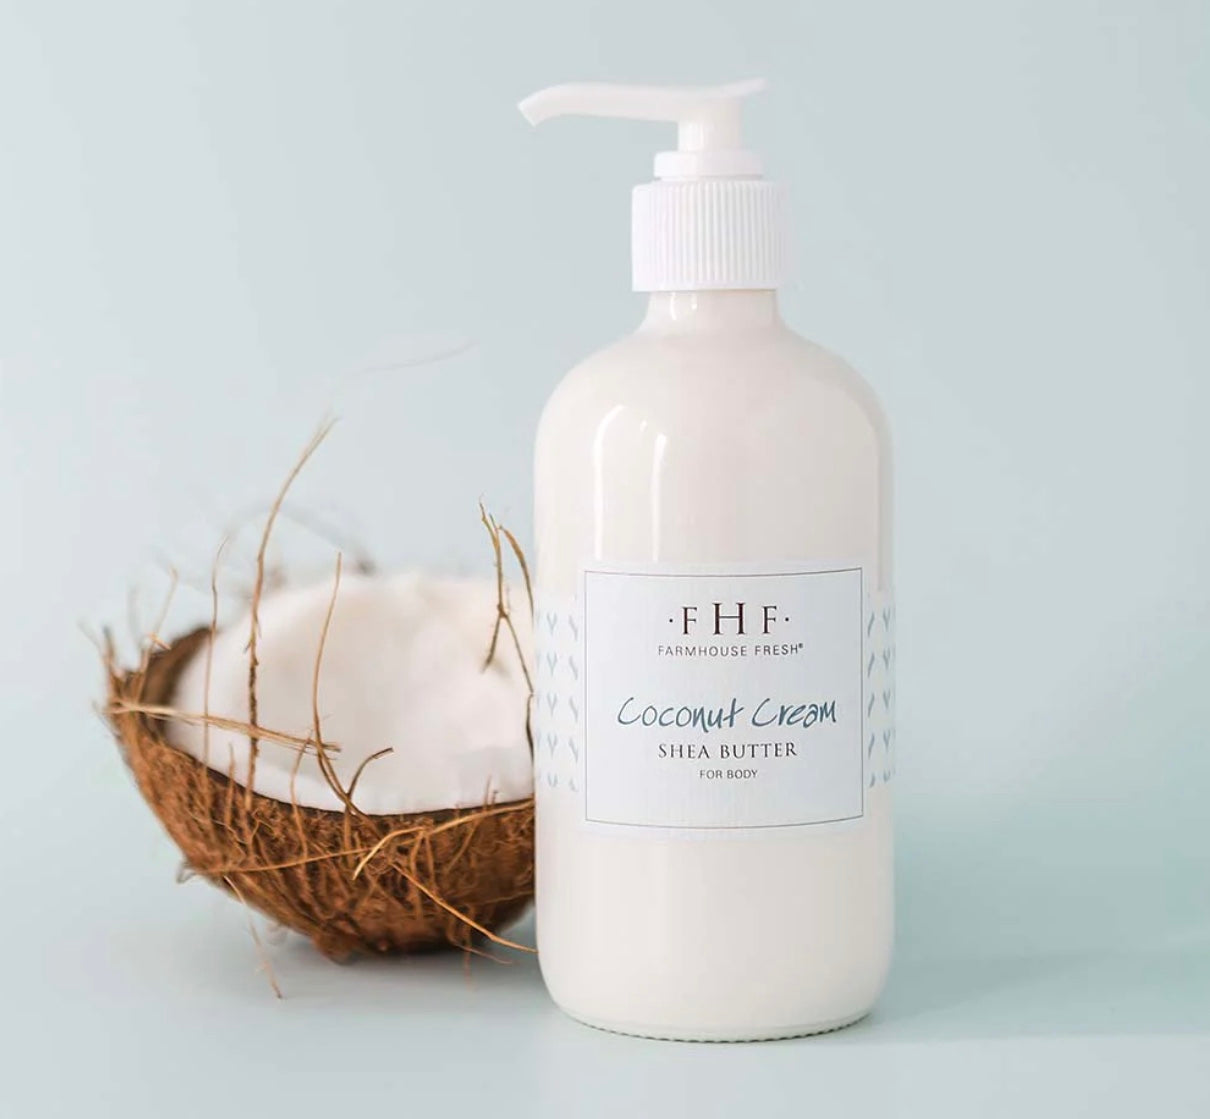 FHF Coconut Cream Shea Butter For Body